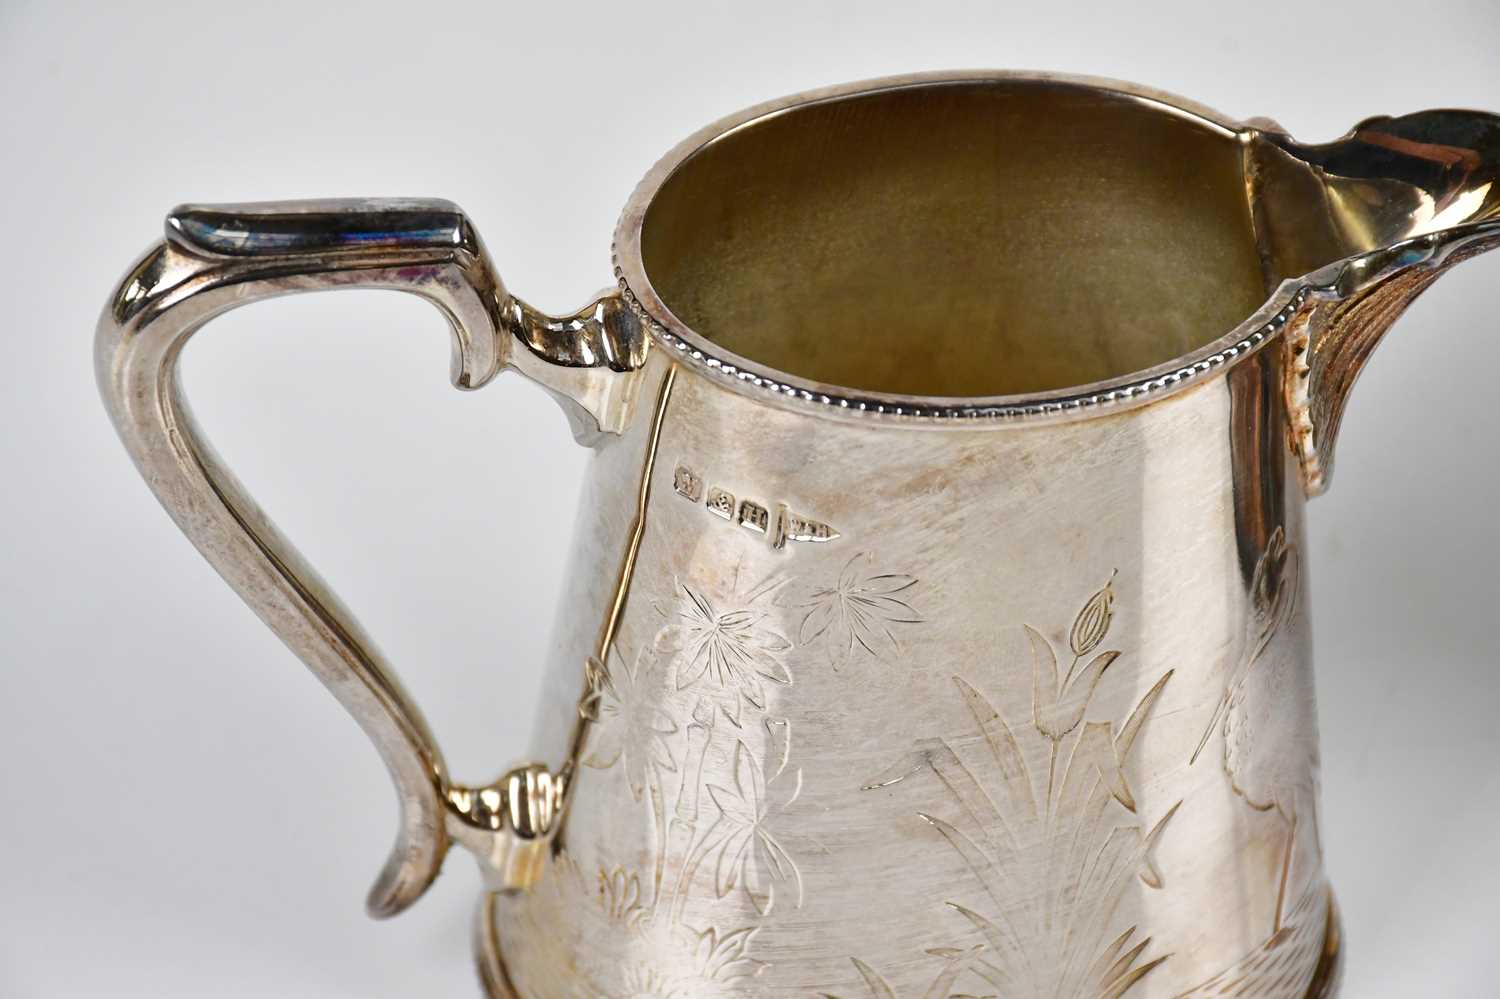 WALKER & HALL; a silver plated twin handled sugar bowl and cream jug chased with cranes in the - Image 2 of 3